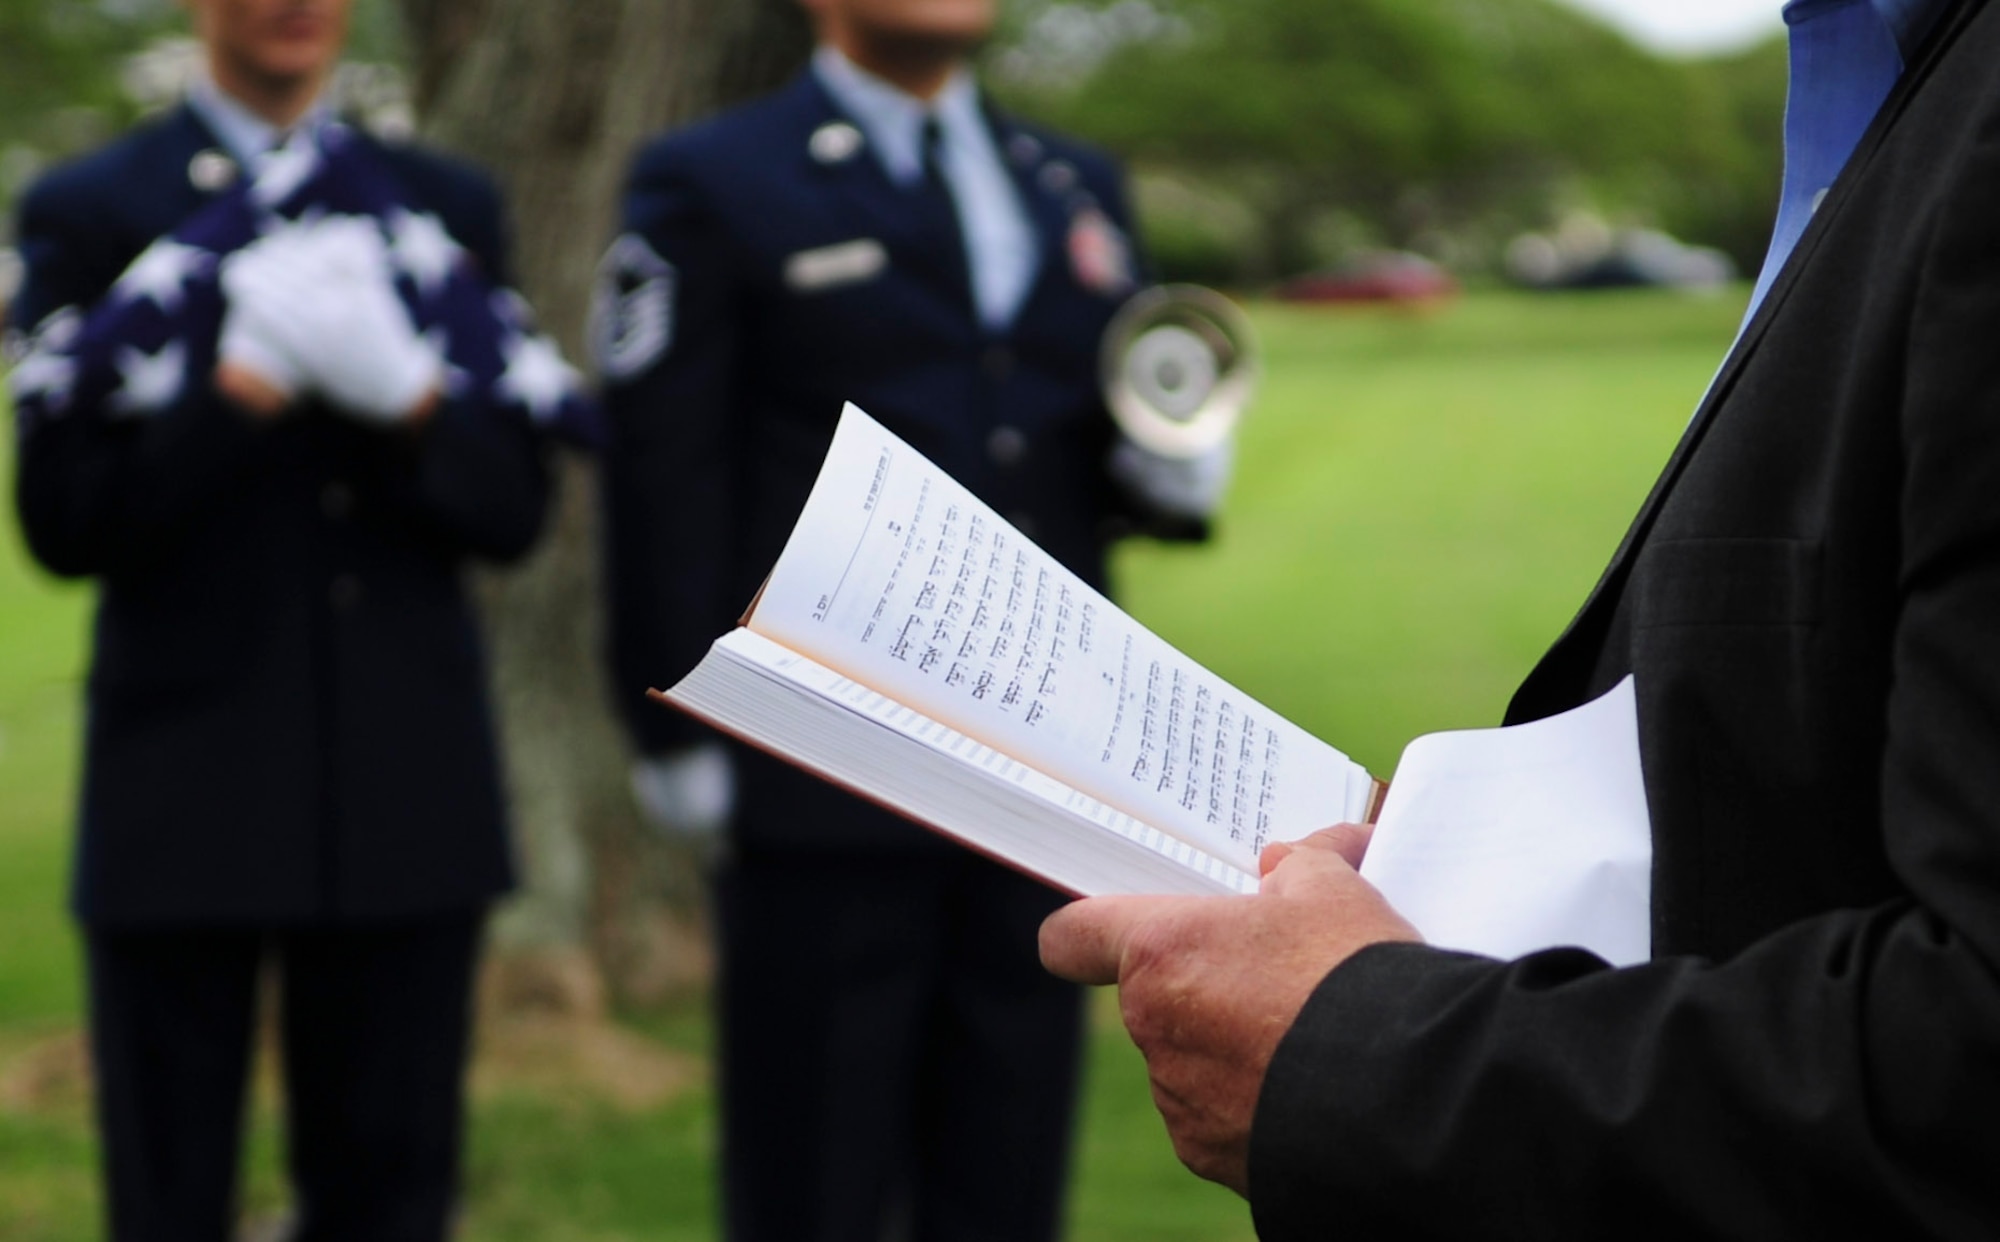 Daniel Bender, leader at the Lay Aloha Jewish Chapel, reads the Kelma’male Rachamim a prayer during a memorial service for Staff. Sgt. Jack Weiner, U.S. Army Air Forces, at the National Memorial Cemetery of the Pacific, Feb. 28, 2017. Weiner died in 1945 during an air raid in Japan and was originally interred with a tombstone featuring a Christian Cross instead of the requested Star of David. (U.S. Air Force photo by Tech. Sgt. Heather Redman)